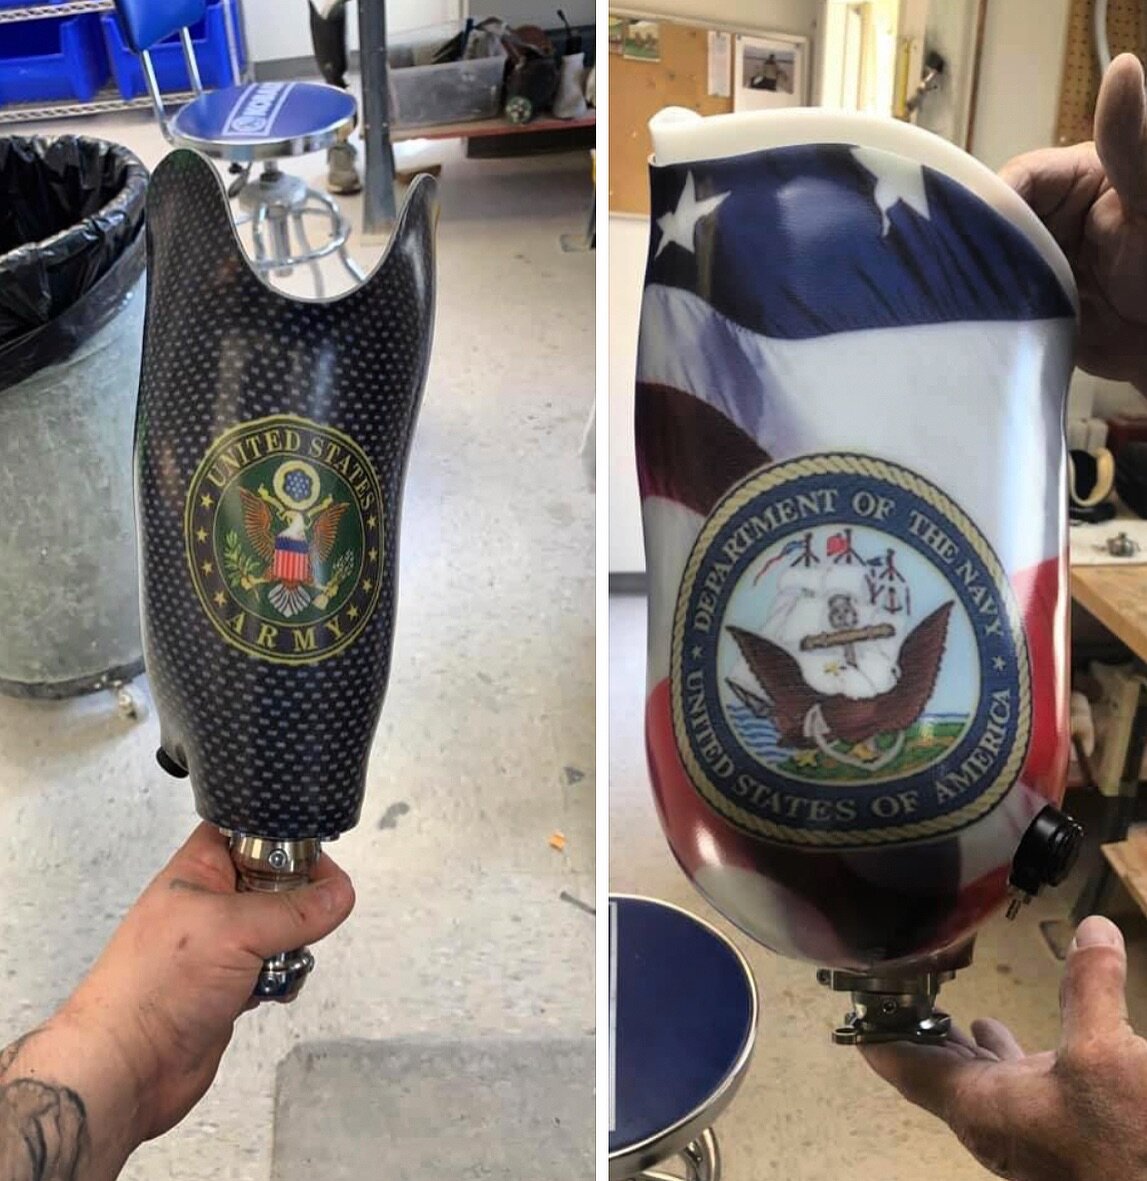 Are you Team Army or Team Navy? You gotta admit these look pretty awesome! Custom fit &amp; design from the &ldquo;artists&rdquo; at the Reach lab. #teamarmy #teamnavy 🇺🇸